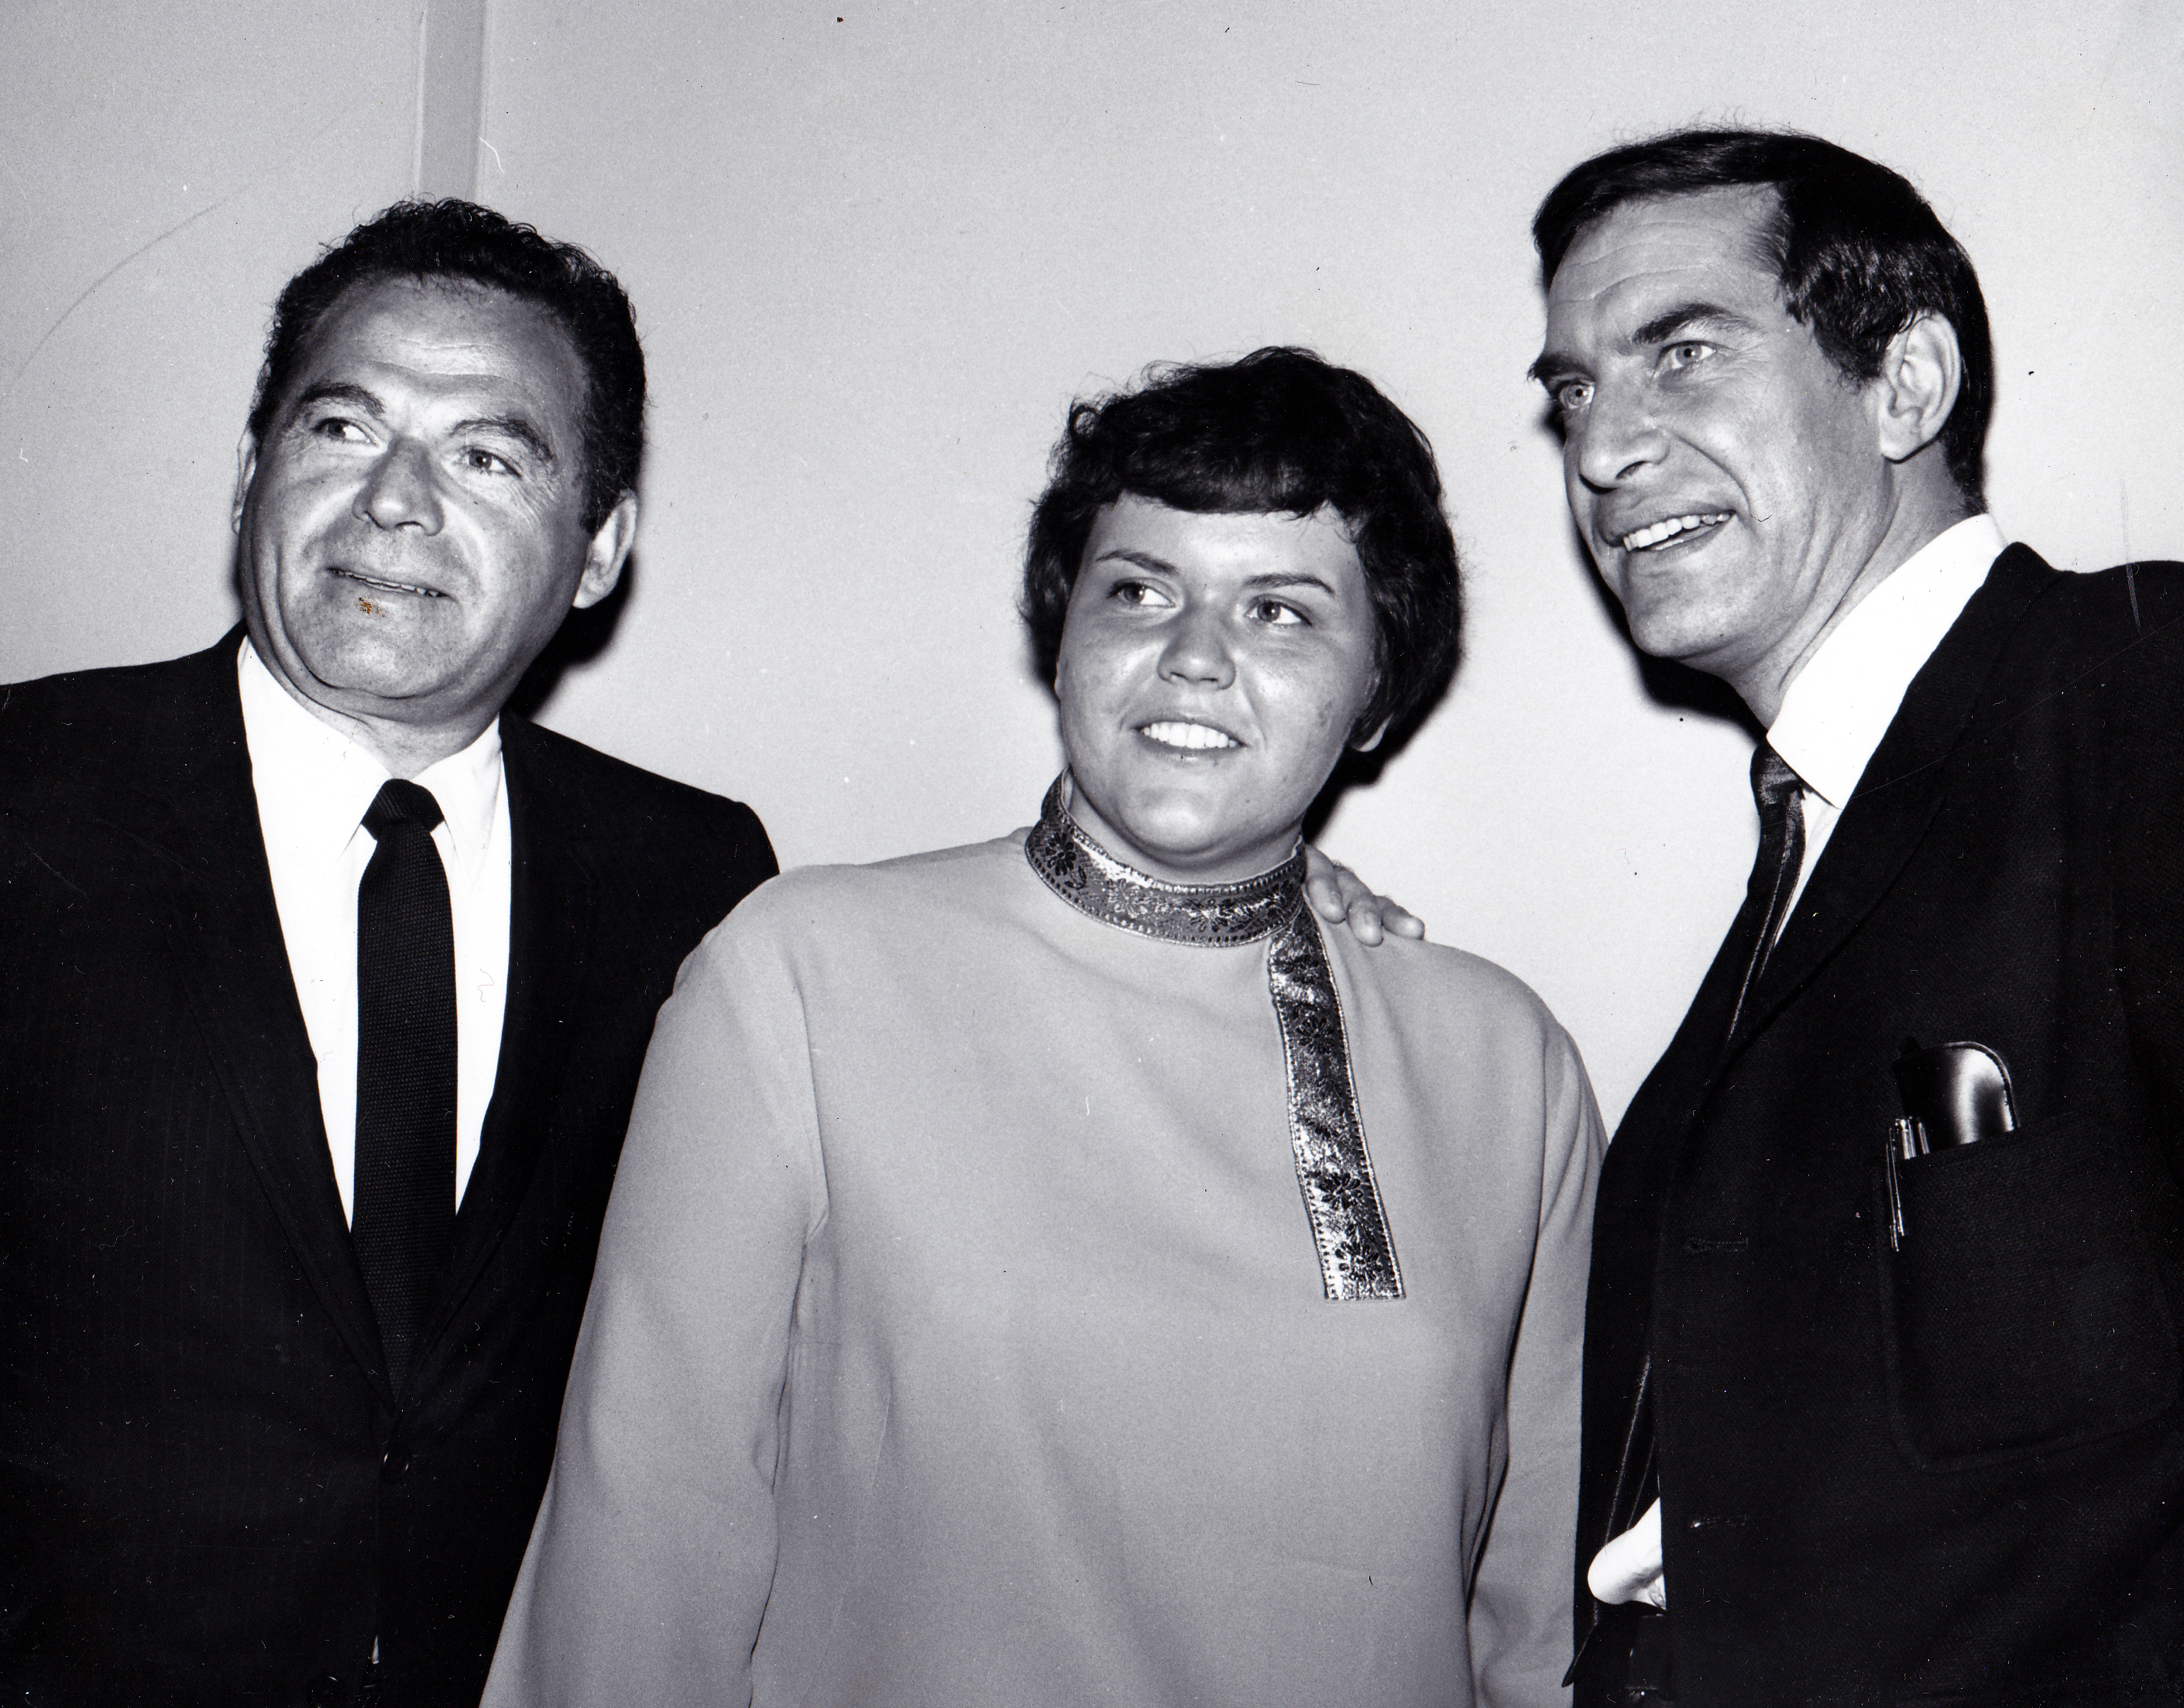 Mission Impossible Photo - Judy, Nehemiah Persoff and Martin Laudau